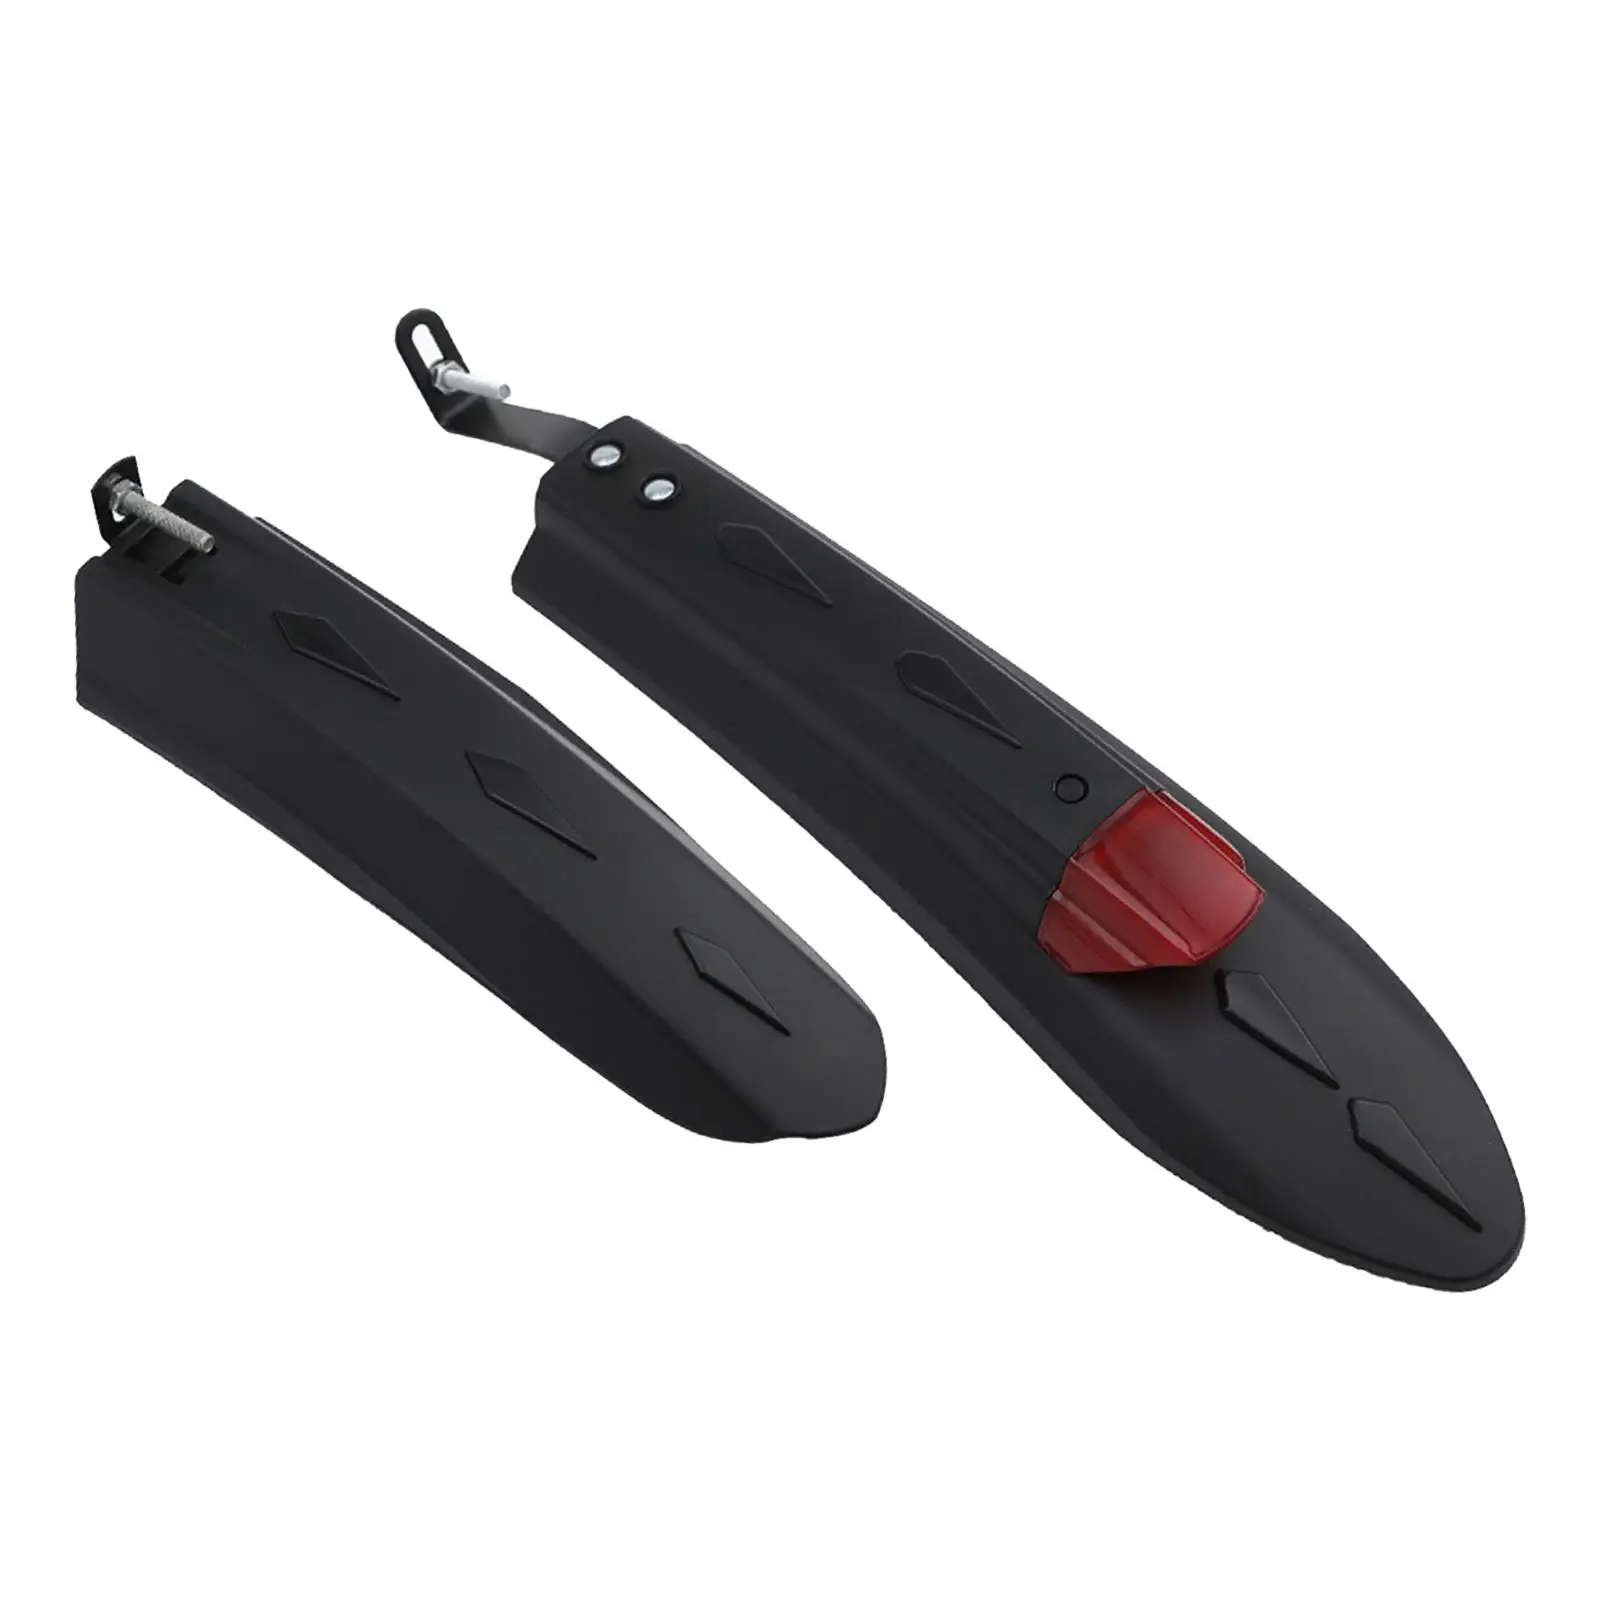 Bike Mudguard Set Portable with Light Simple Installation Bike Front & Rear Fenders for Riding Cycling Sports Travel Accessories